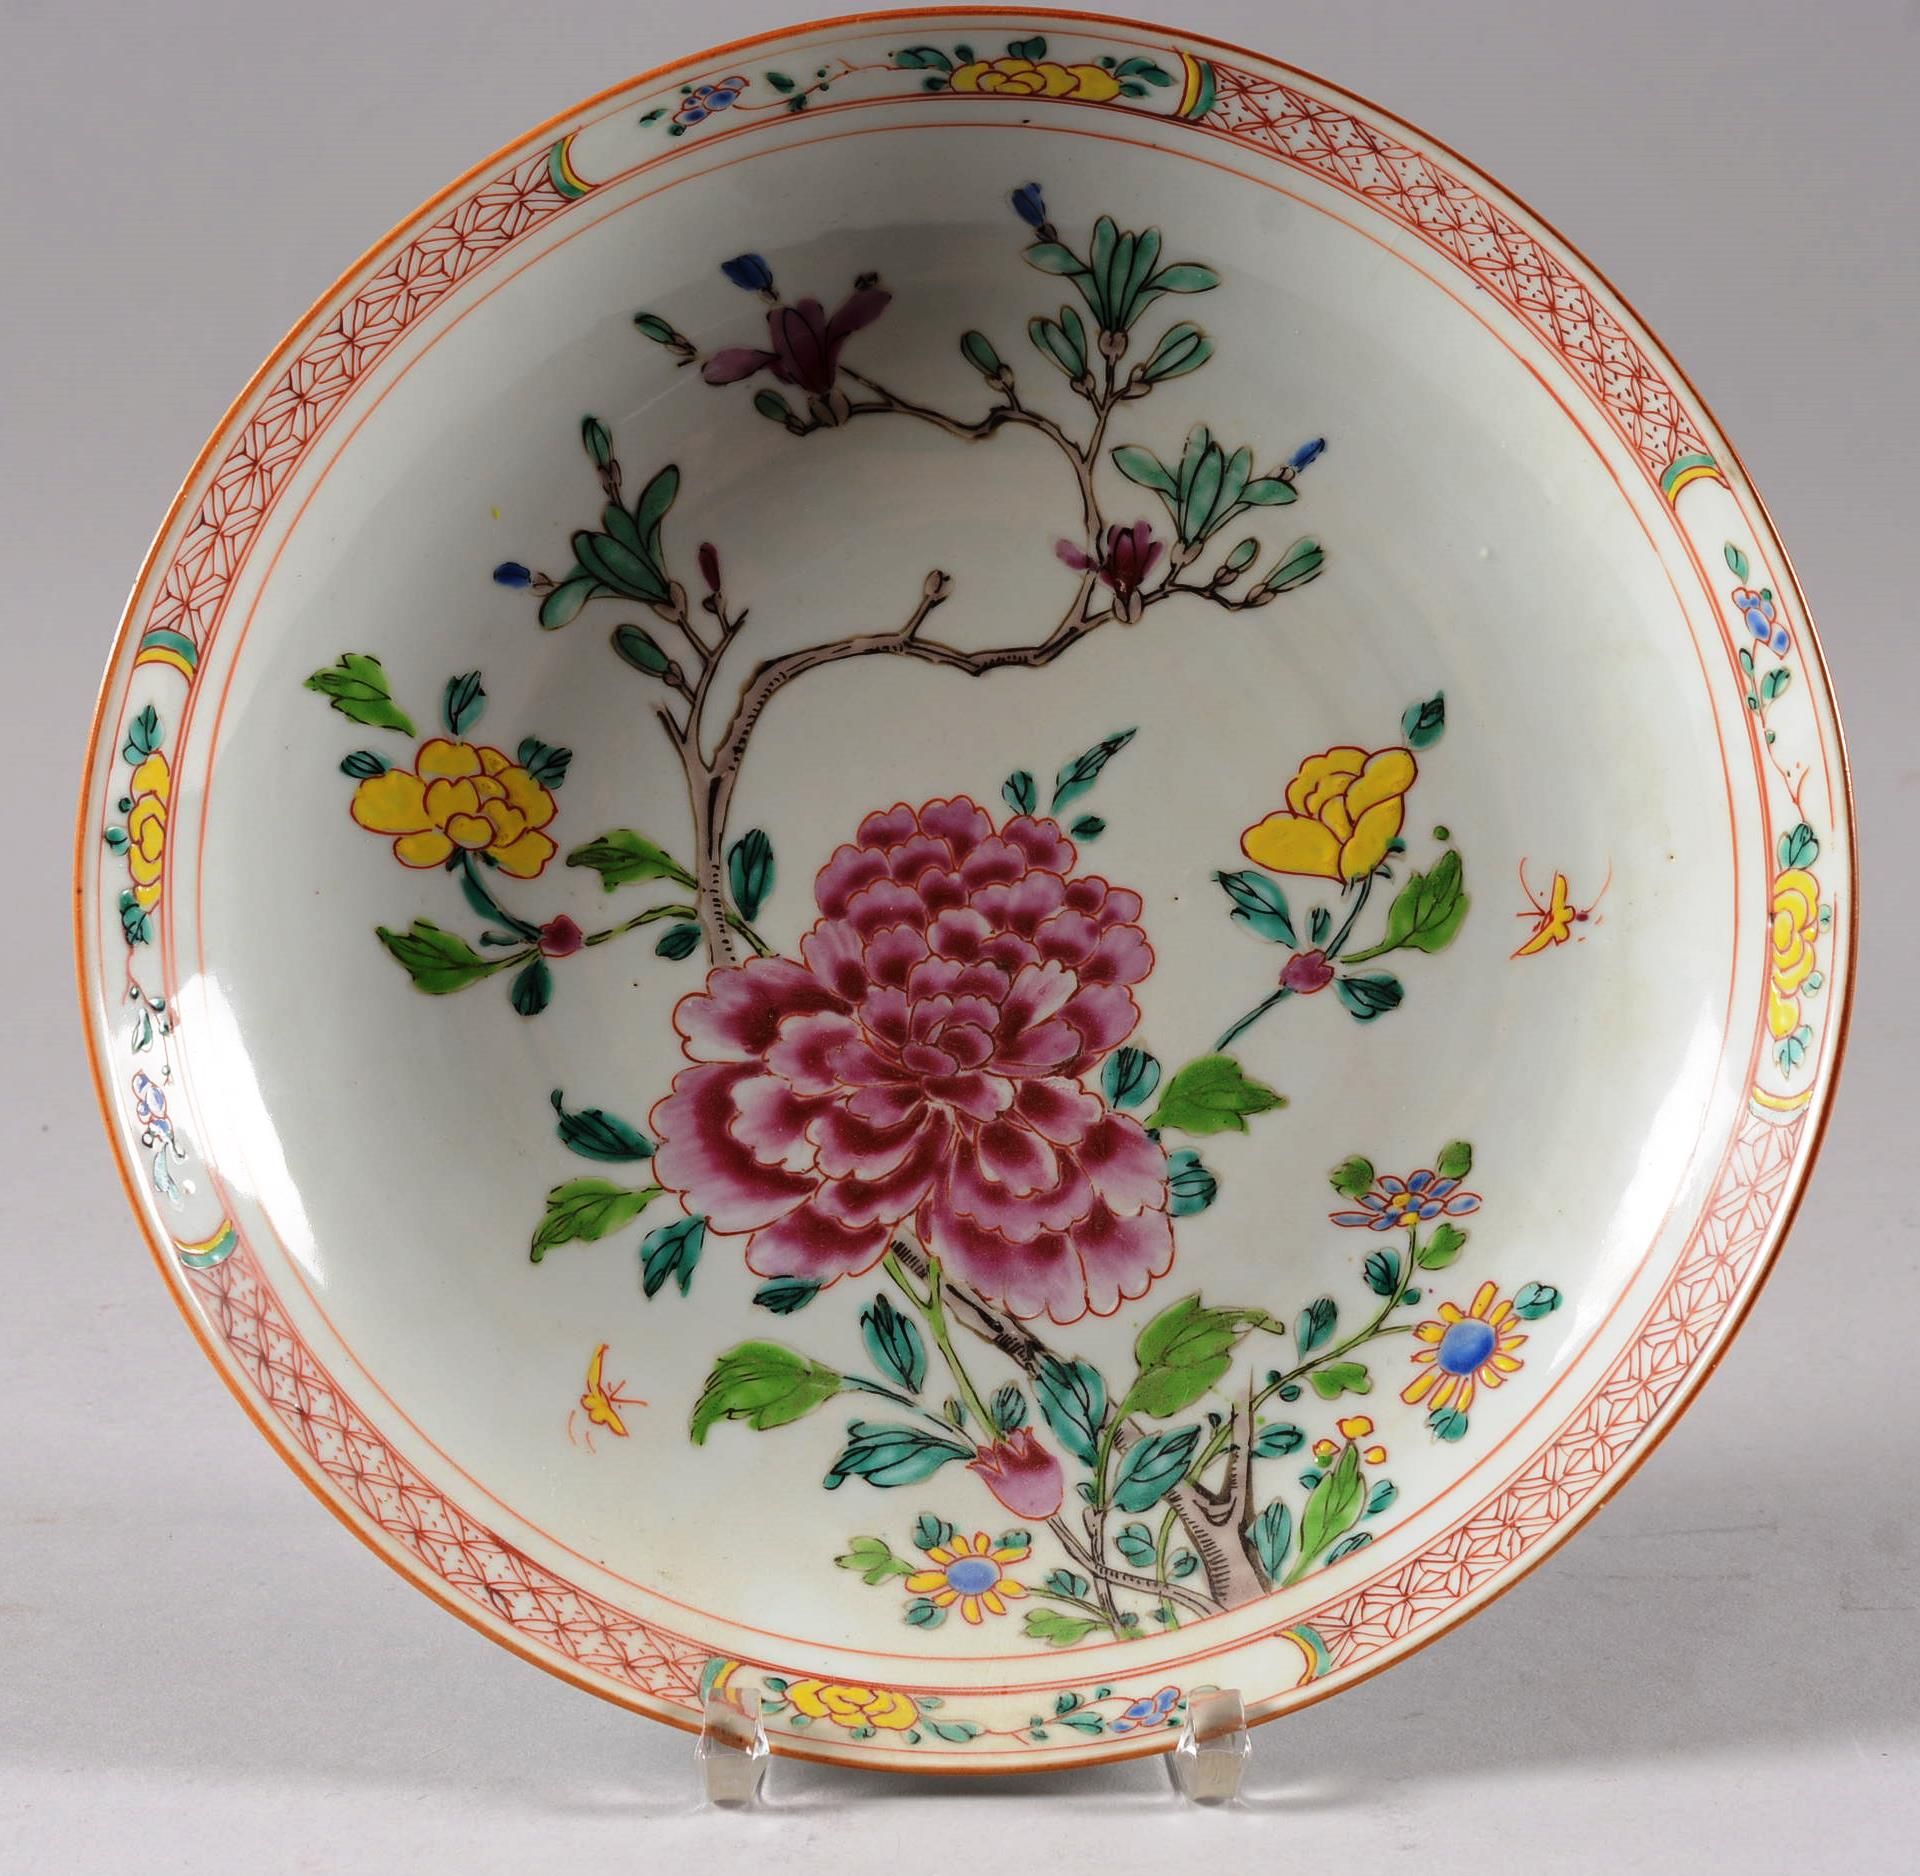 Coupe circulaire en porcelaine chinoise CHINE.

Coupe circulaire en porcelaine c&hellip;